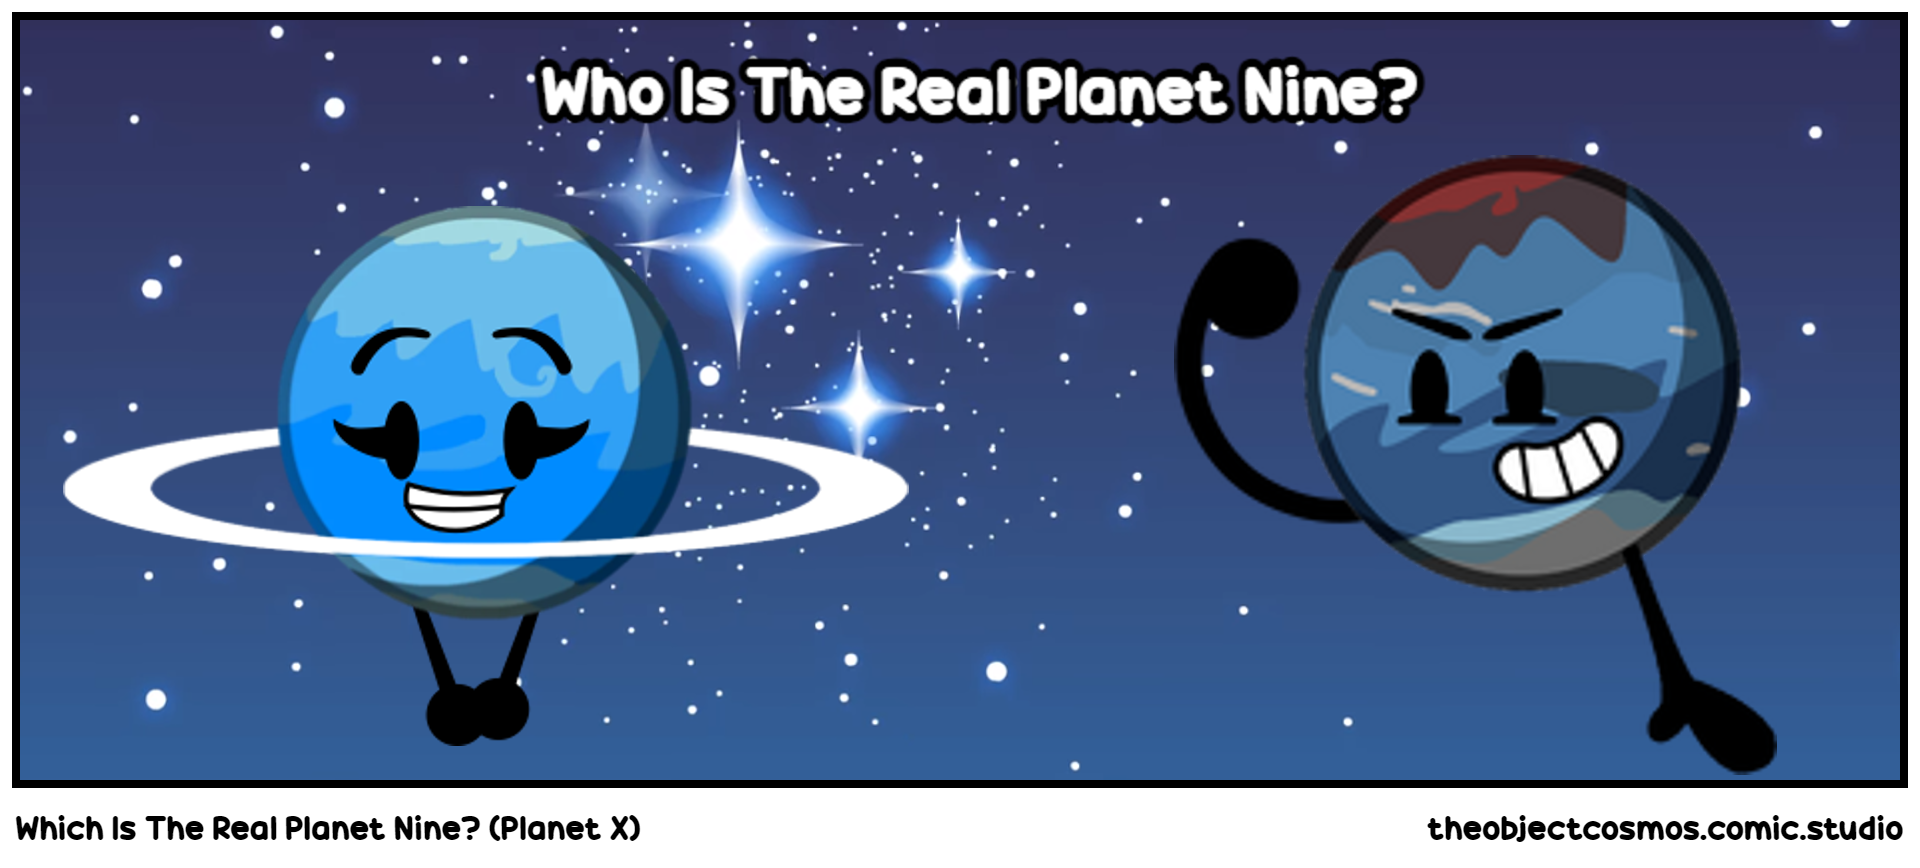 Which Is The Real Planet Nine? (Planet X)